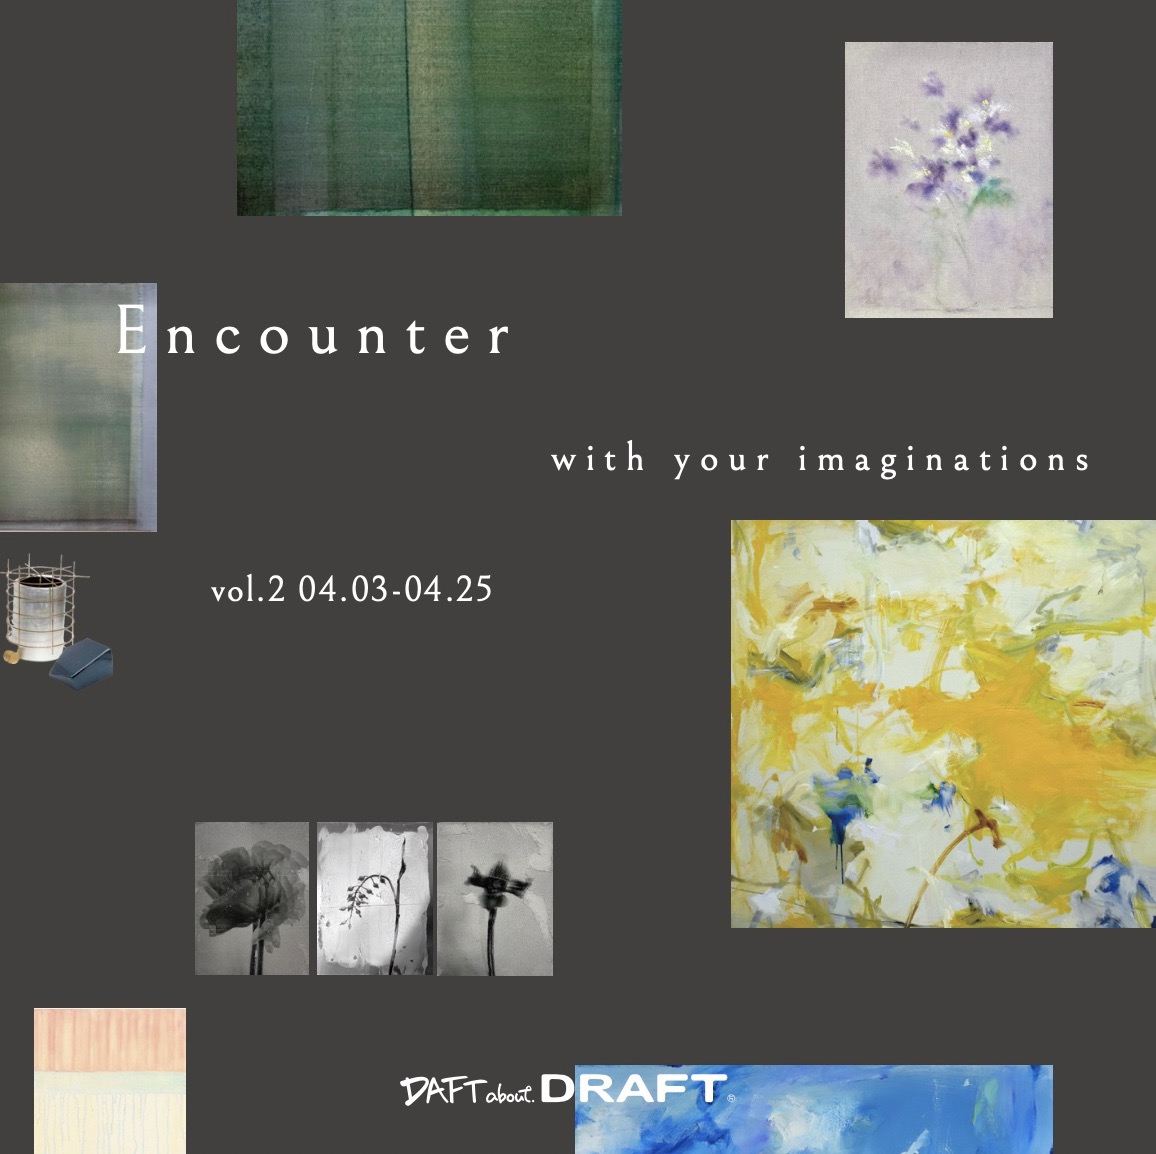 【News】　展覧会「Encounter with your imaginations」DAFT about DRAFT FLAGSHIP STOREのご案内 / Exhibition “Encounter with your imaginations” DAFT about DRAFT FLAGSHIP STORE